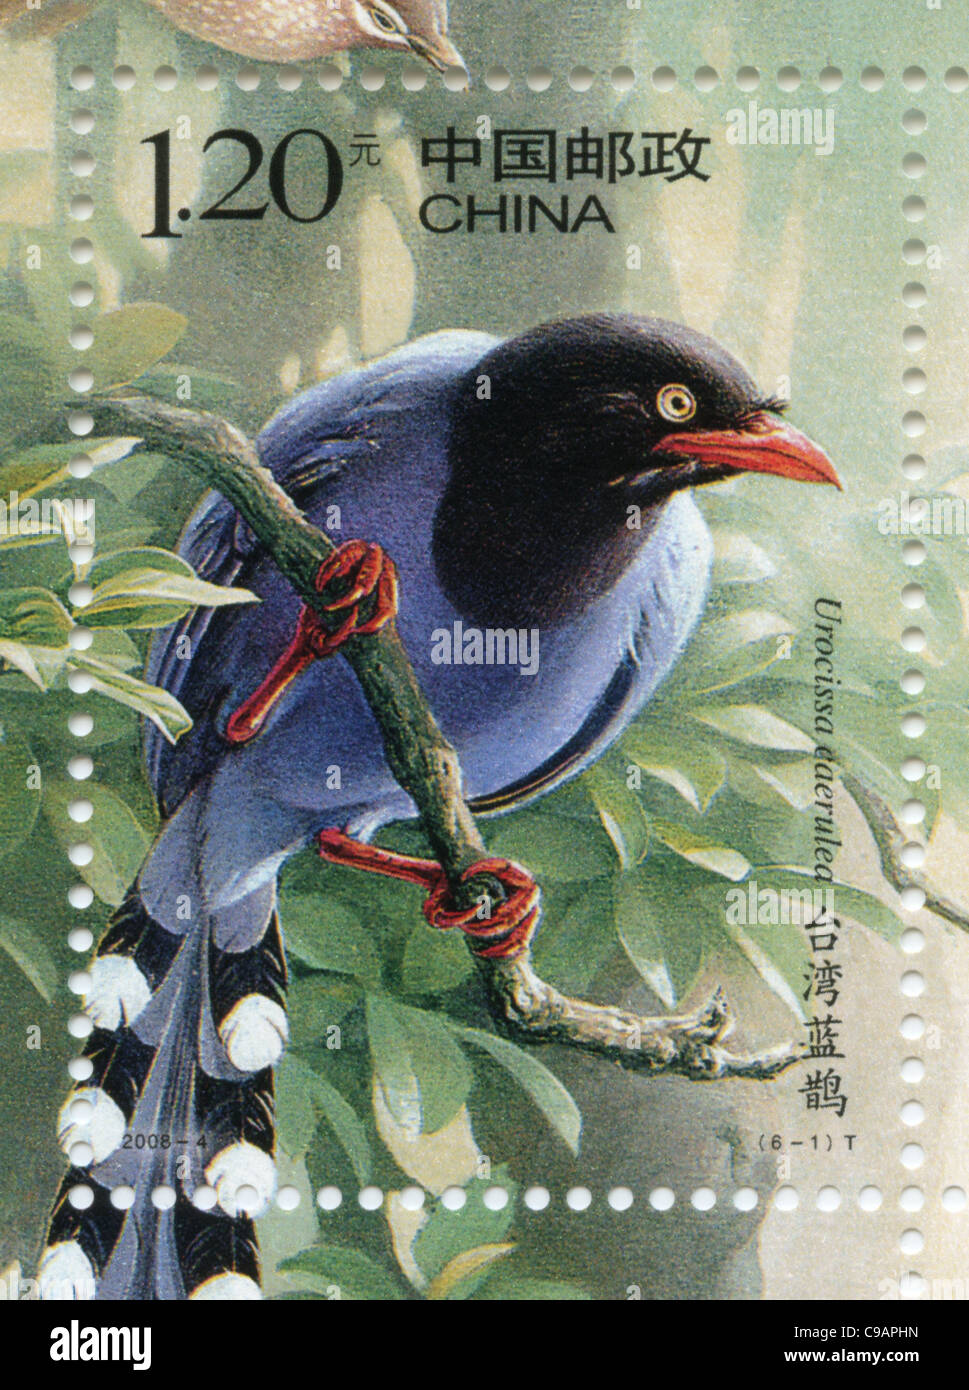 China postage stamp - Taiwan Blue Magpie Stock Photo